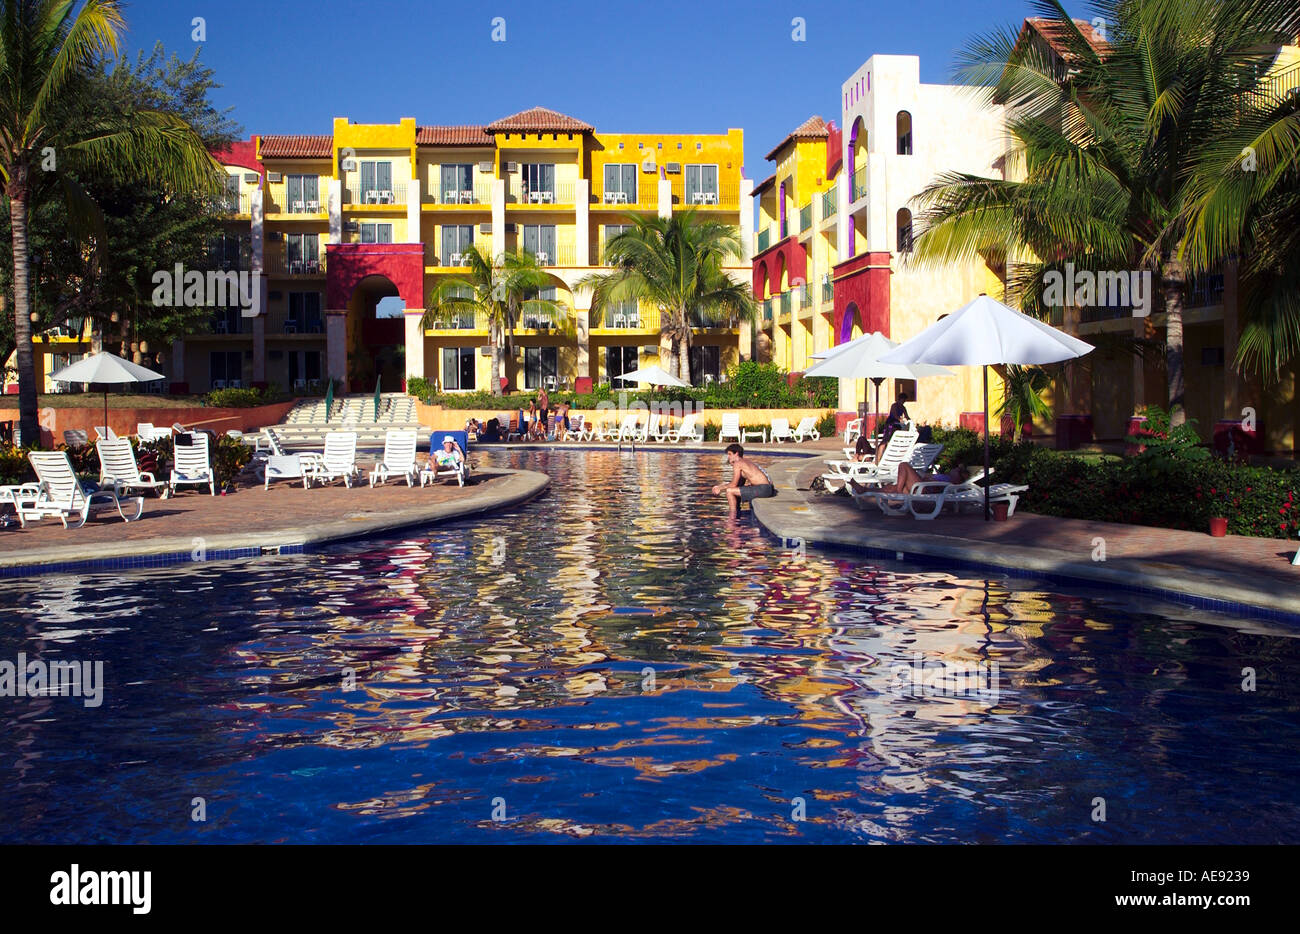 Royal Decameron Resort in Puerto Vallarta Mexico with pools and tropical gardens Stock Photo